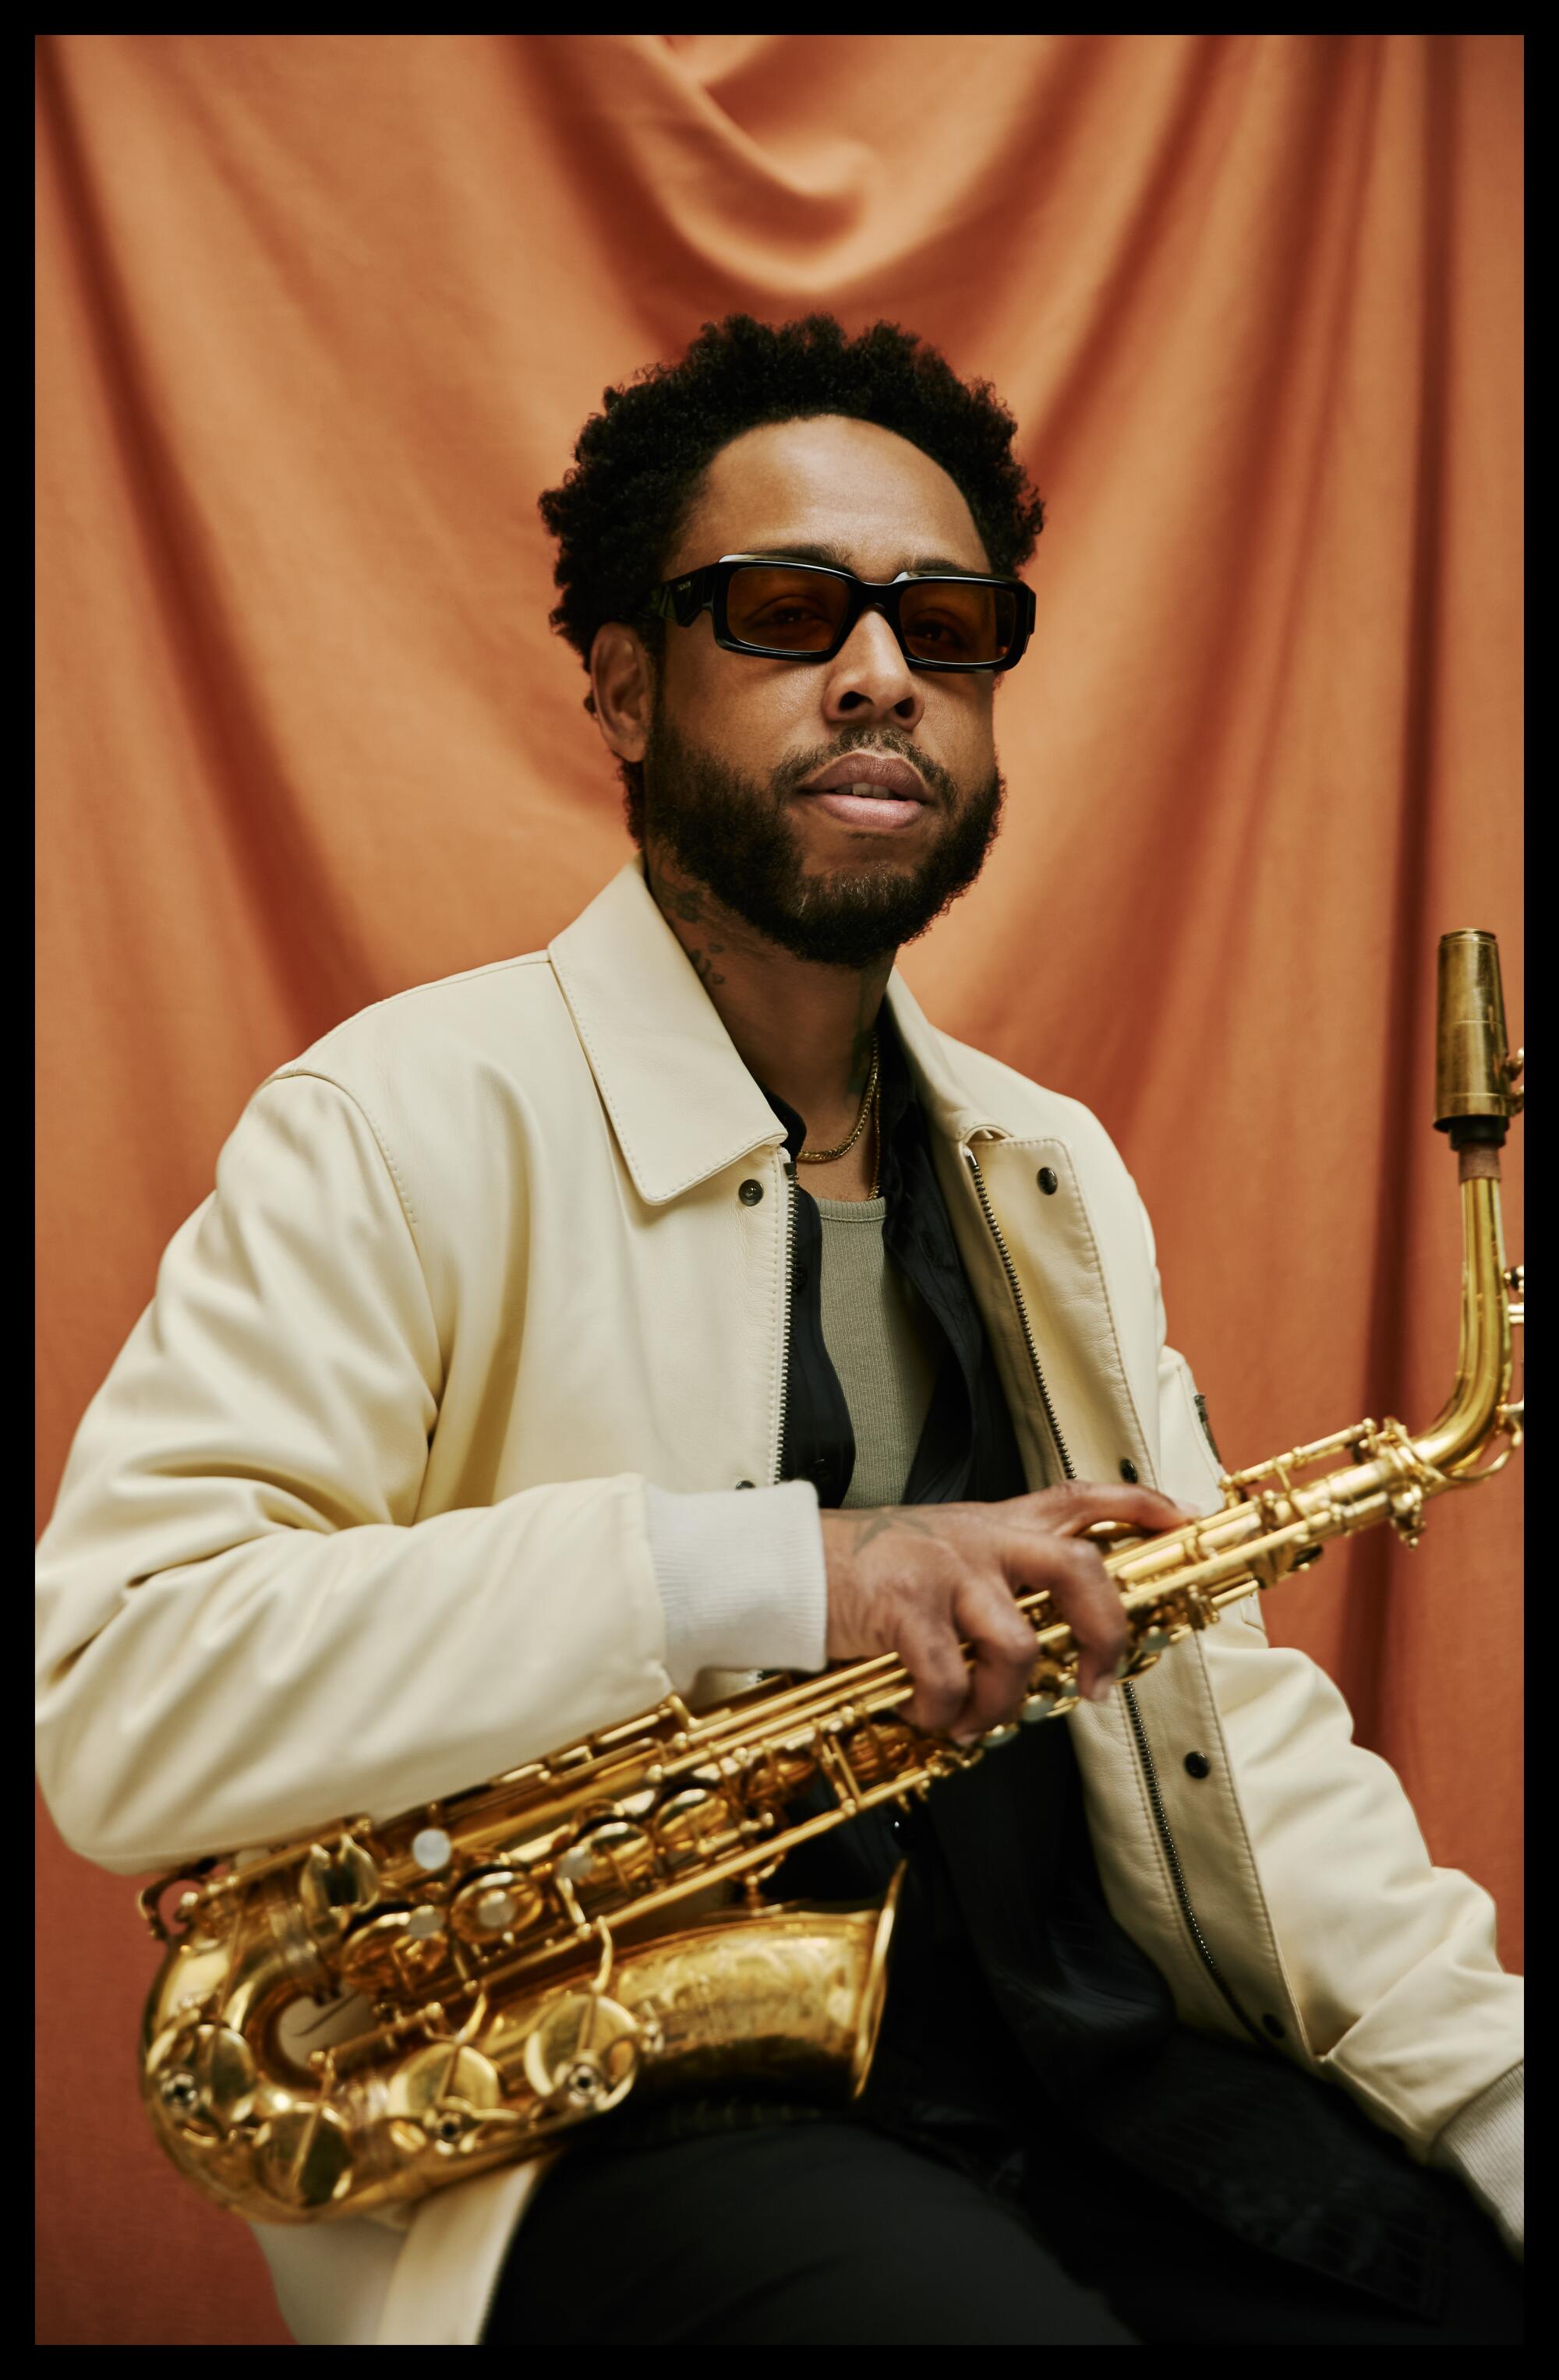 The musician Terrace Martin holds his saxophone, an orange cloth backdrop behind him.